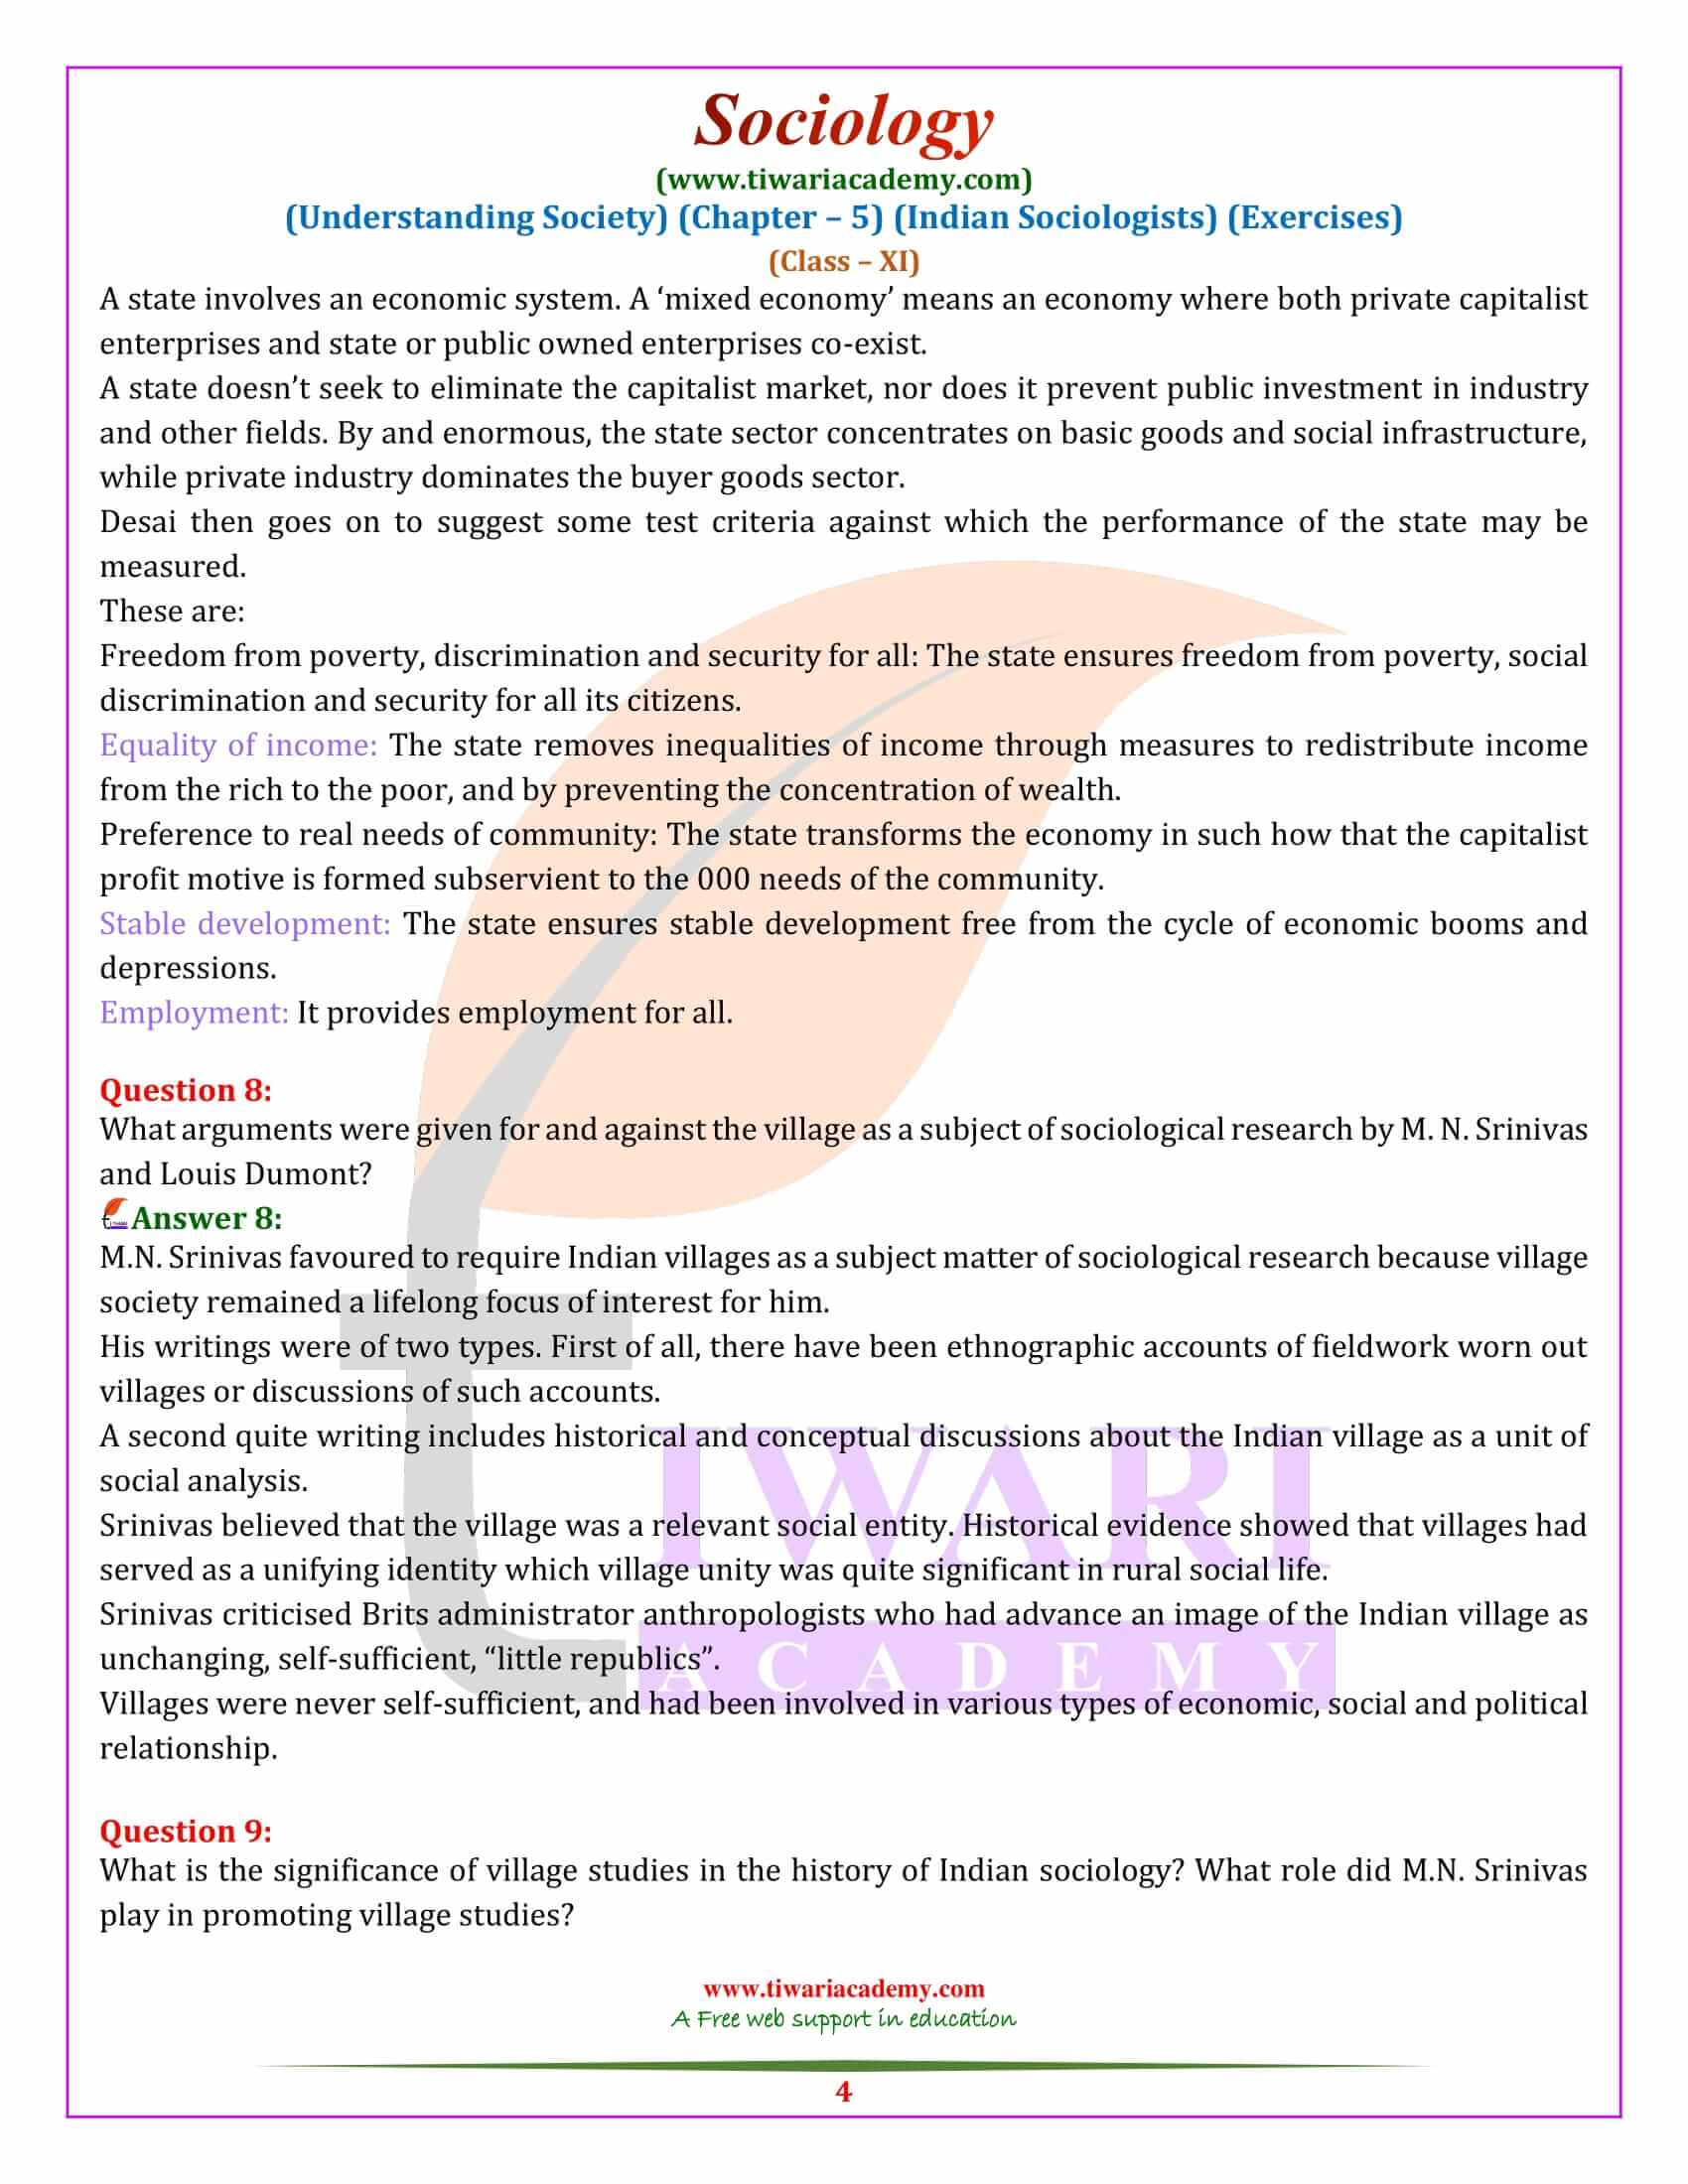 NCERT Solutions for Class 11 Sociology Chapter 5 Question Answers